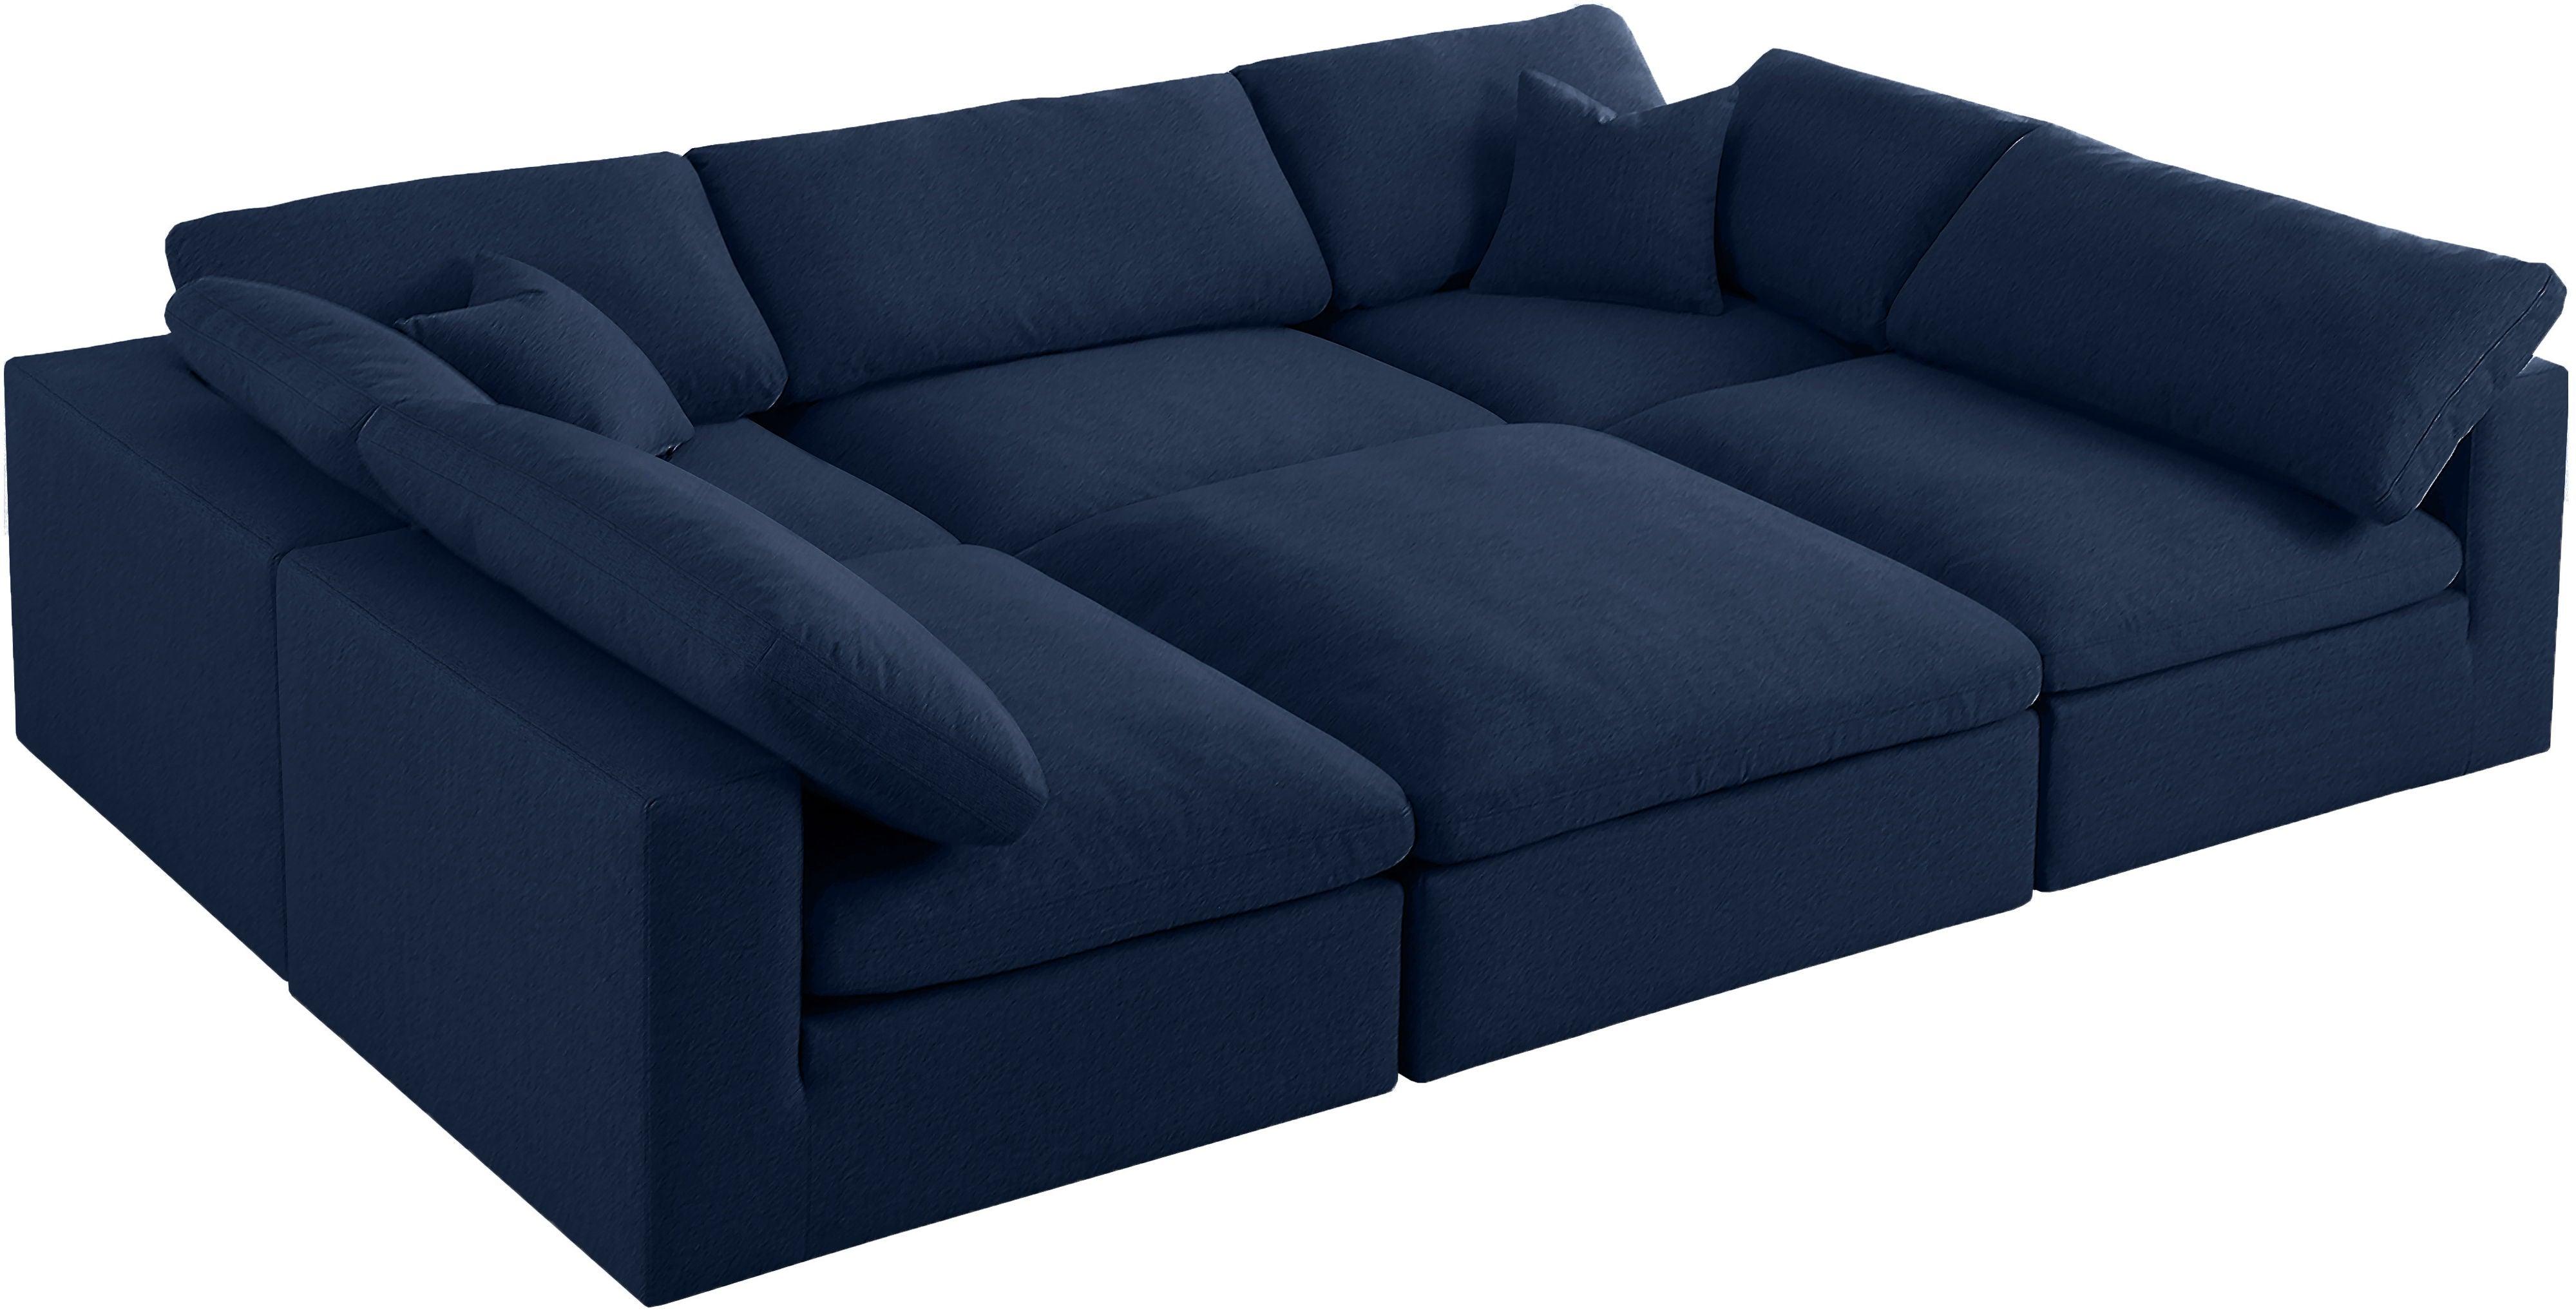 Meridian Furniture - Serene - Linen Textured Fabric Deluxe Comfort Modular Sectional 6 Piece - Navy - Fabric - 5th Avenue Furniture